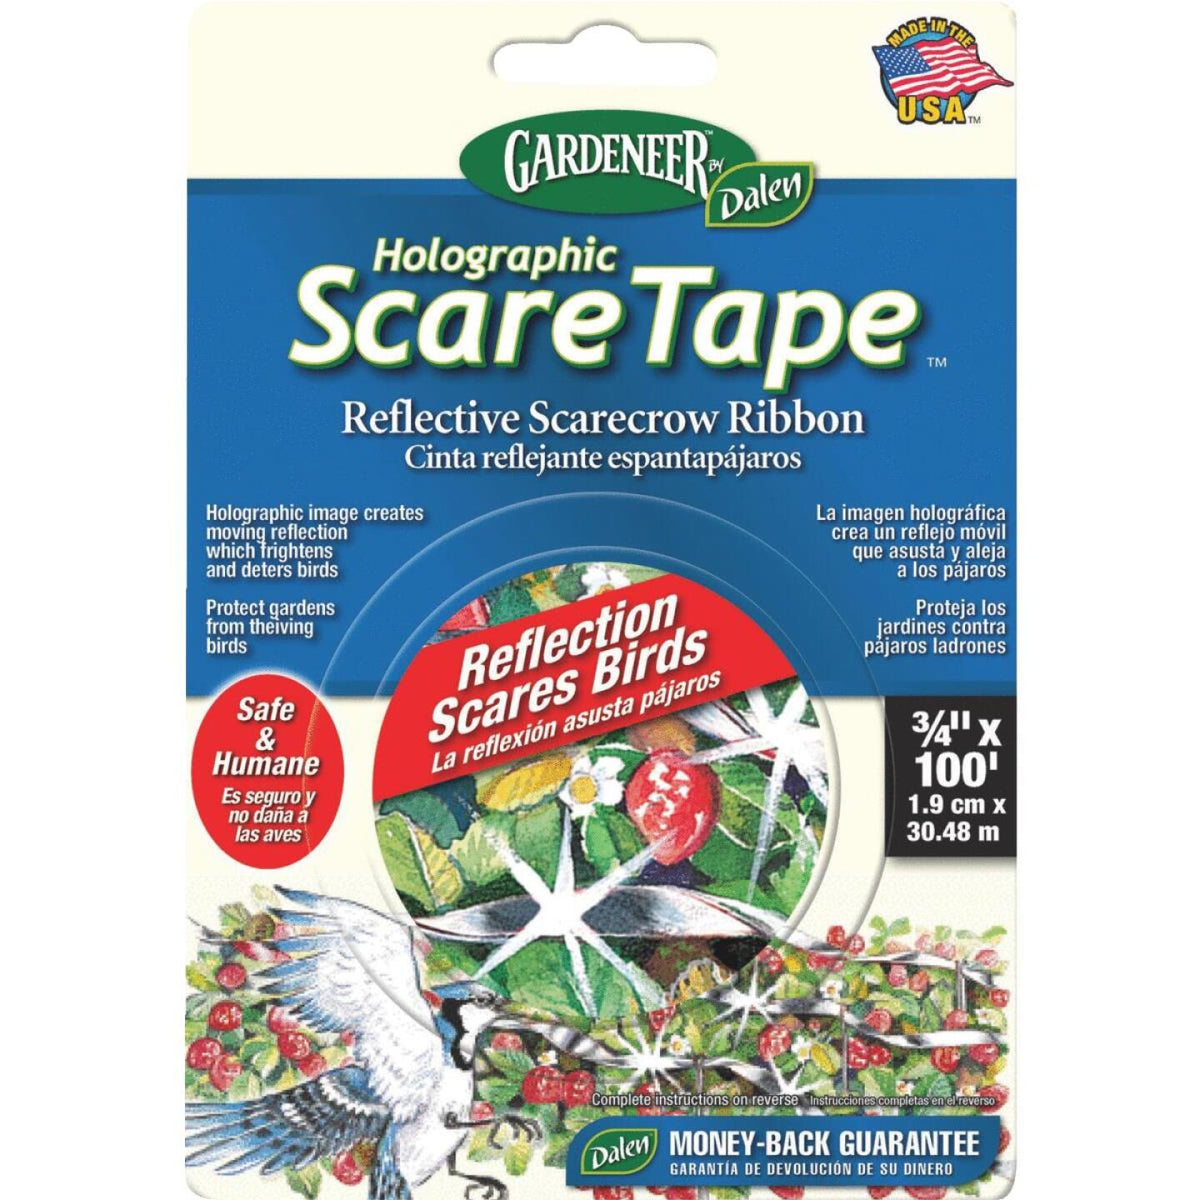 Gardeneer Holographic Scare Tape 3/4 In. W. x 100 Ft. L. Bird Deterrent  Tape - Fort Worth, TX - Handley's Feed Store